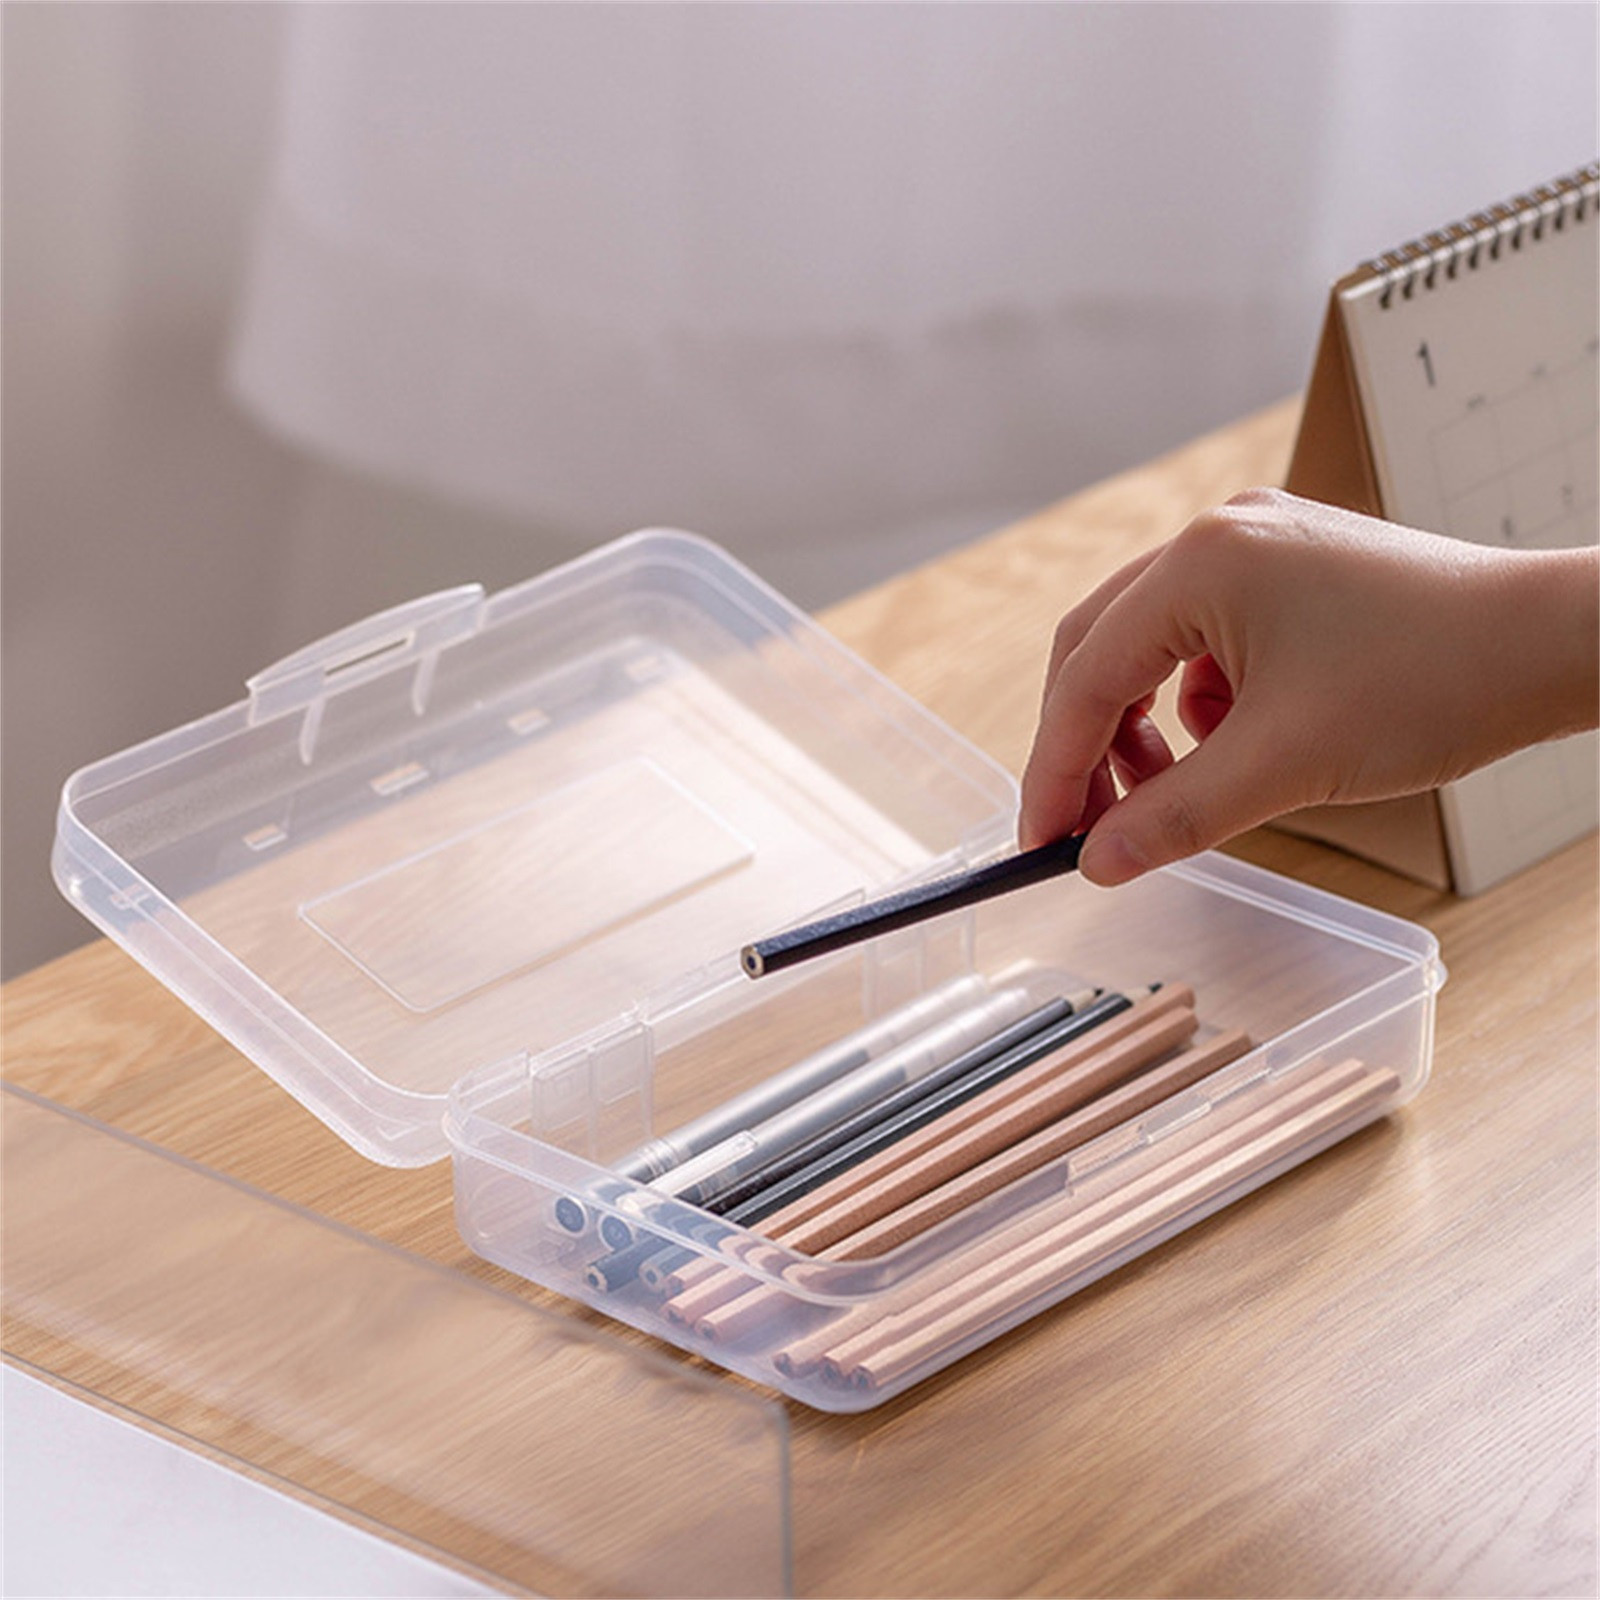 Moocorvic Plastic Pencil Box , Large Capacity Teacher Organization for Classroom Pen Organizer Small Storage Containers (8.1inch), Size: One Size